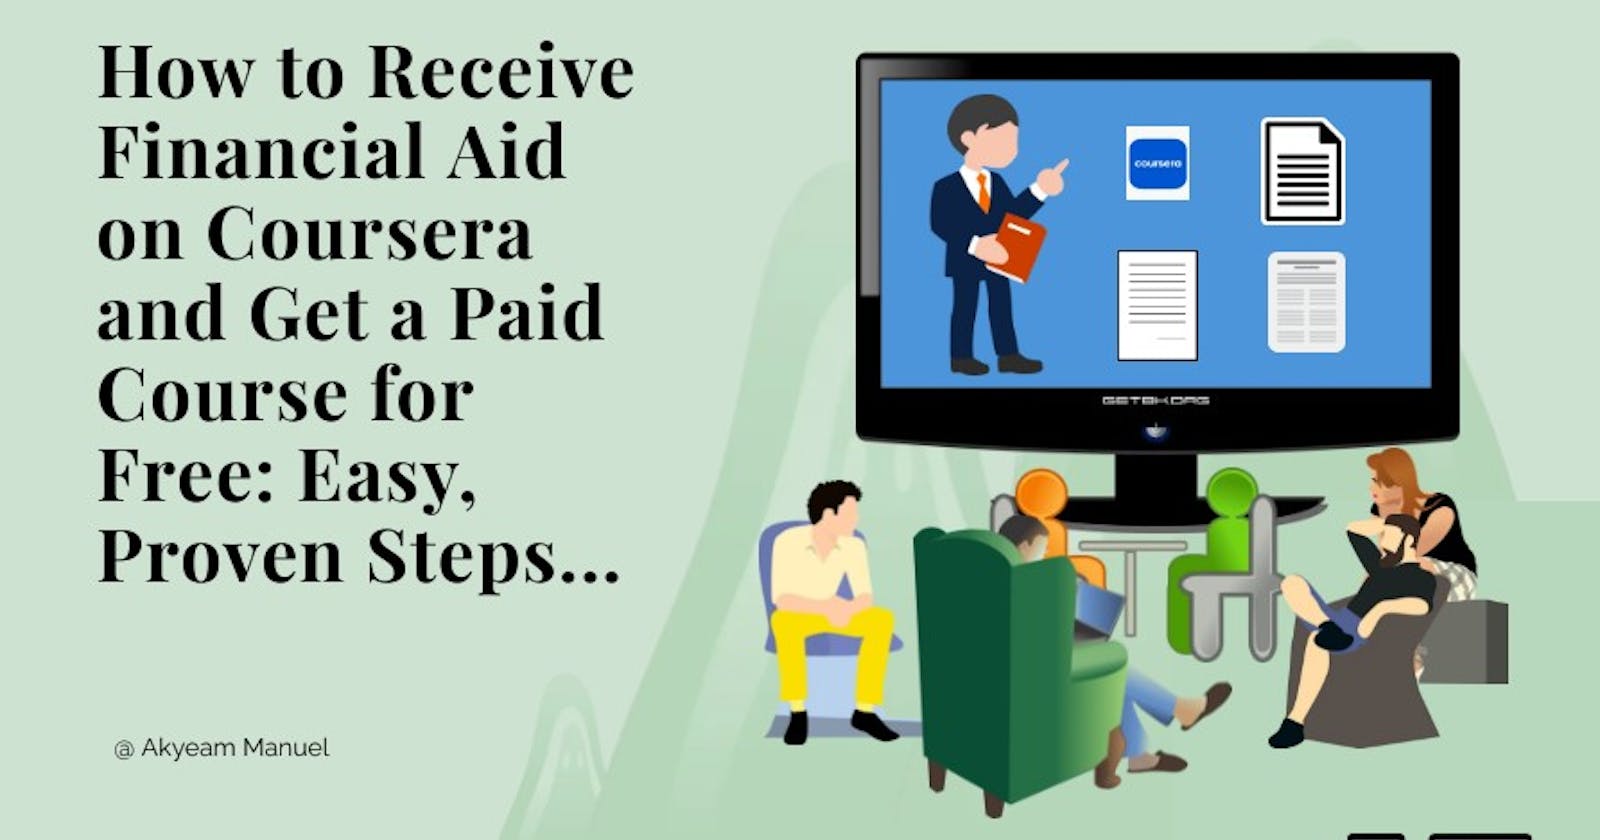 How to Receive Financial Aid on Coursera and Get a Paid Course for Free: Easy, Proven Steps